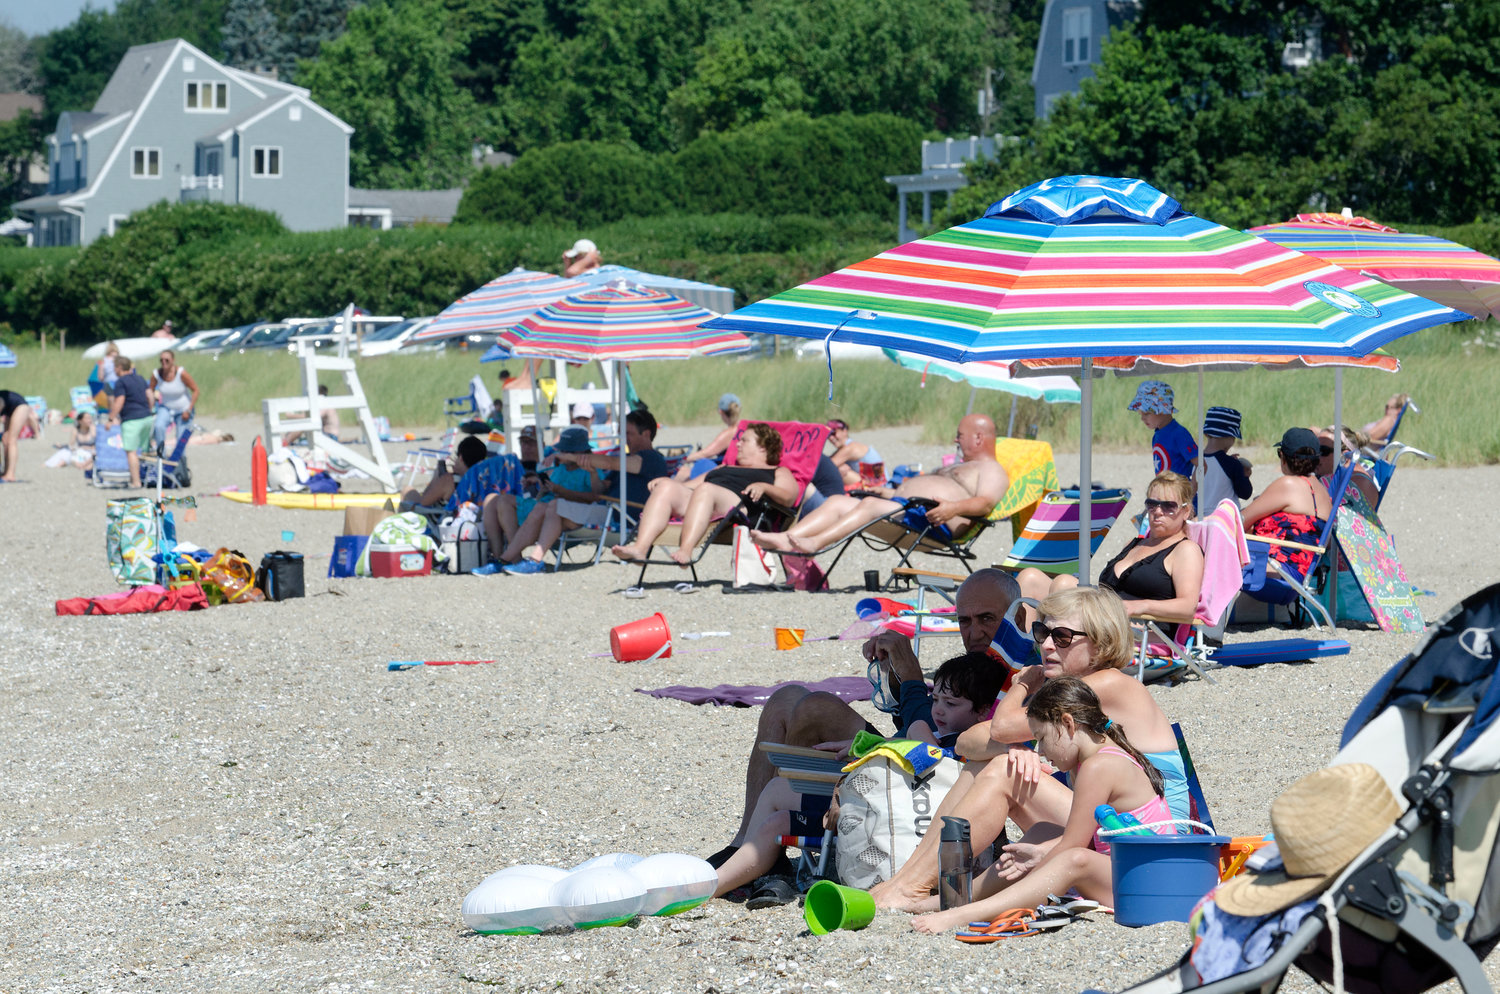 The town beach began allowing non-resident parking on weekdays about two weeks ago. Barrington Beach remains resident-only parking on the weekends